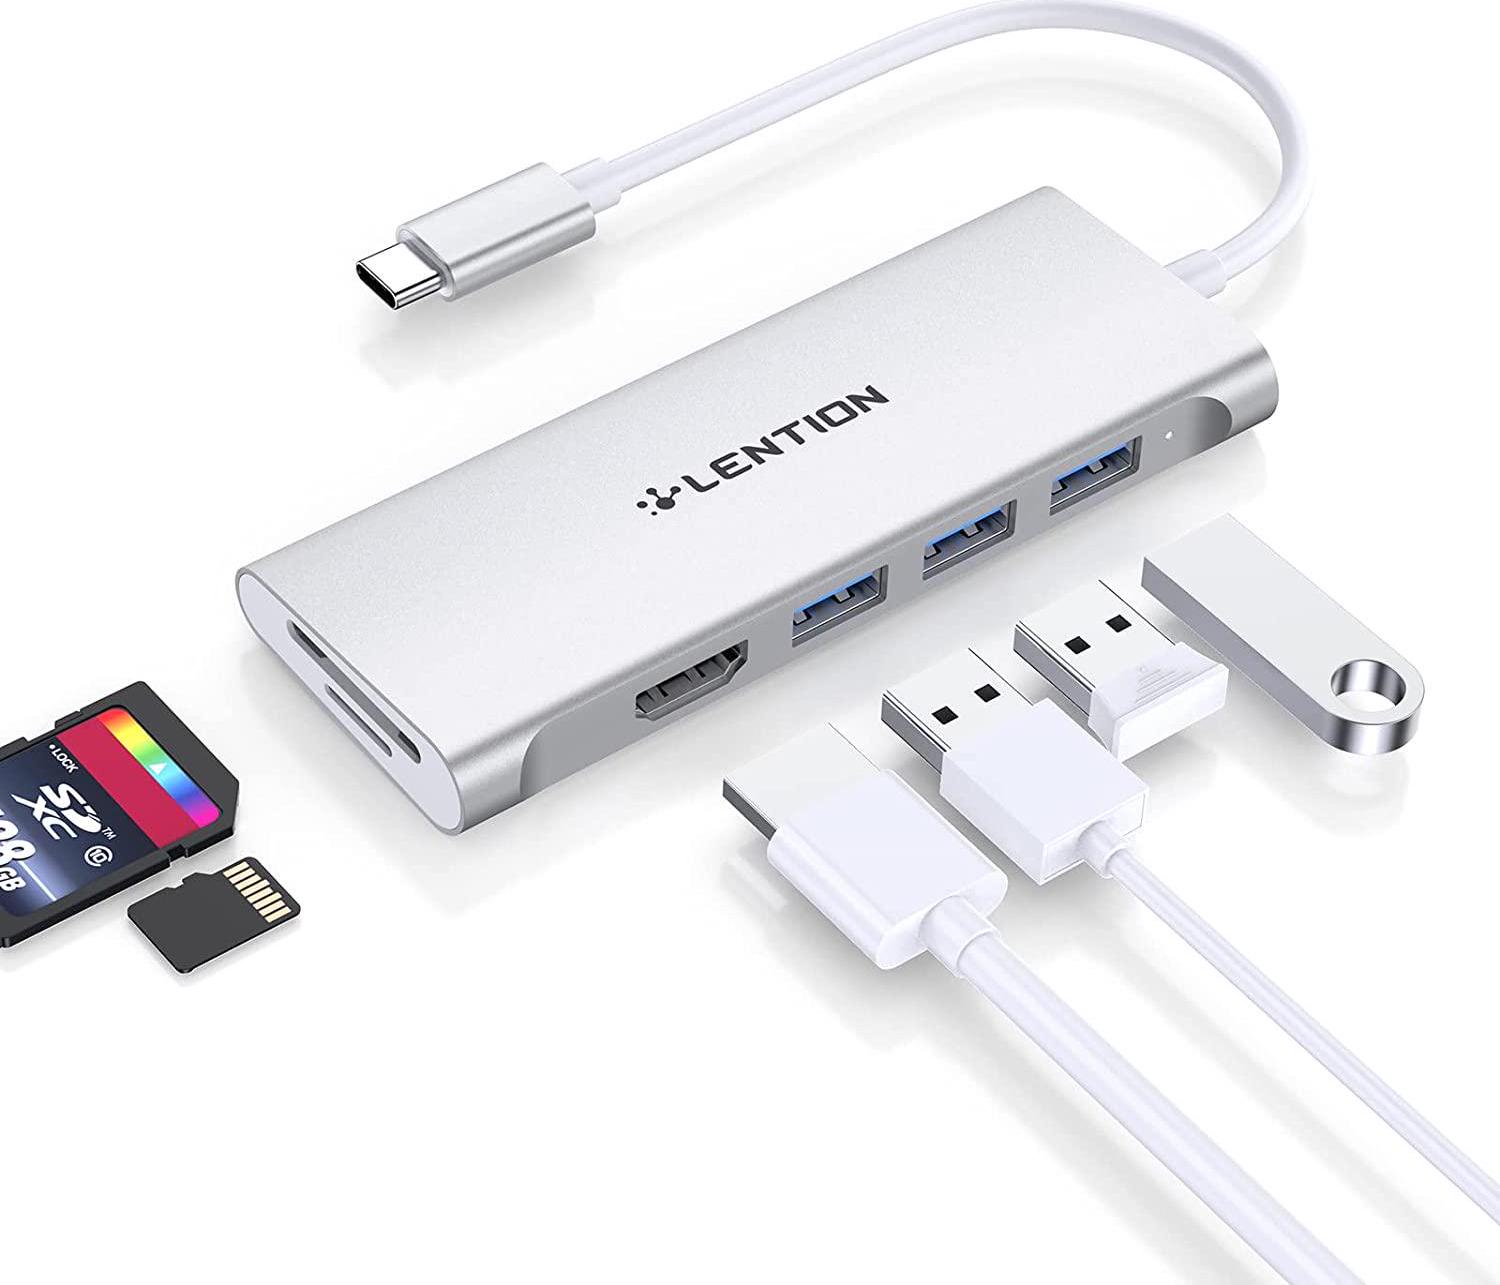 LENTION, LENTION USB C Hub with 4K HDMI, 3 USB 3.0, SD 3.0 Card Reader Compatible 2022-2016 MacBook Pro 13/15/16, New Mac Air/iPad Pro/Surface, More, Multiport Stable Driver Dongle Adapter (CB-C34, Silver)